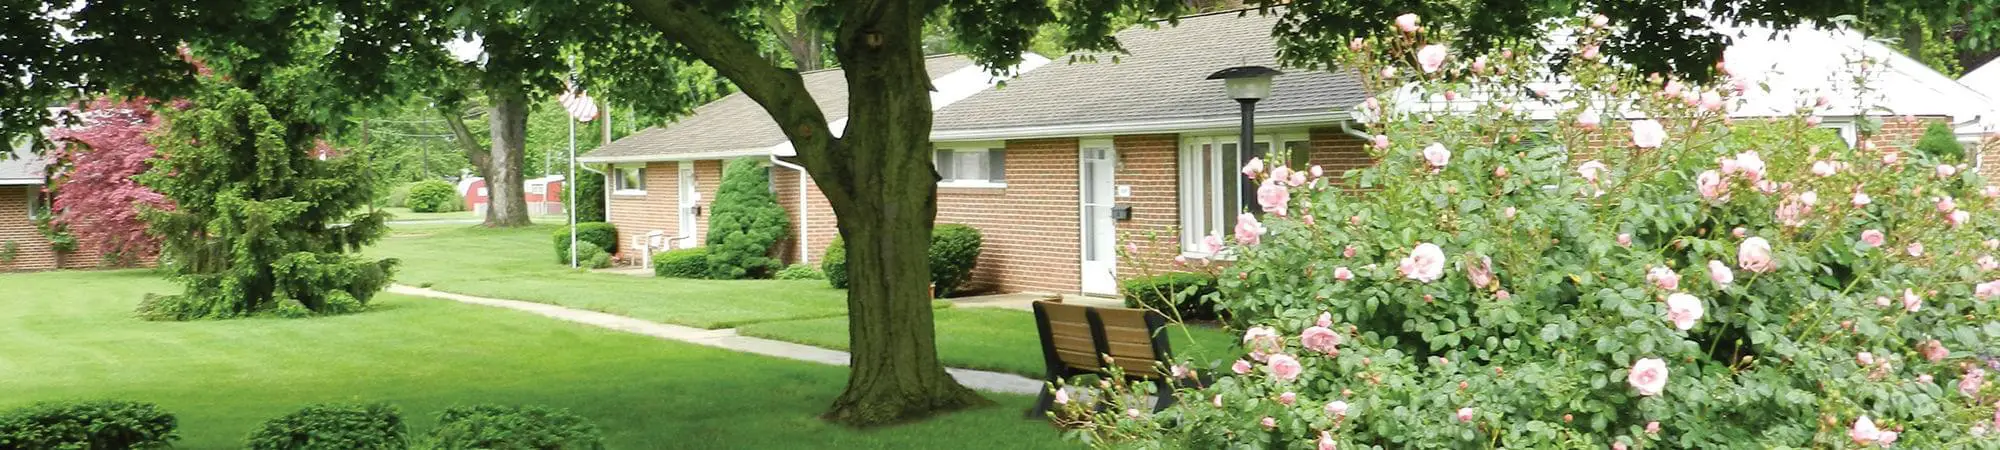 Photo of The Village at Kelly Drive, Assisted Living, Nursing Home, Independent Living, CCRC, York, PA 6